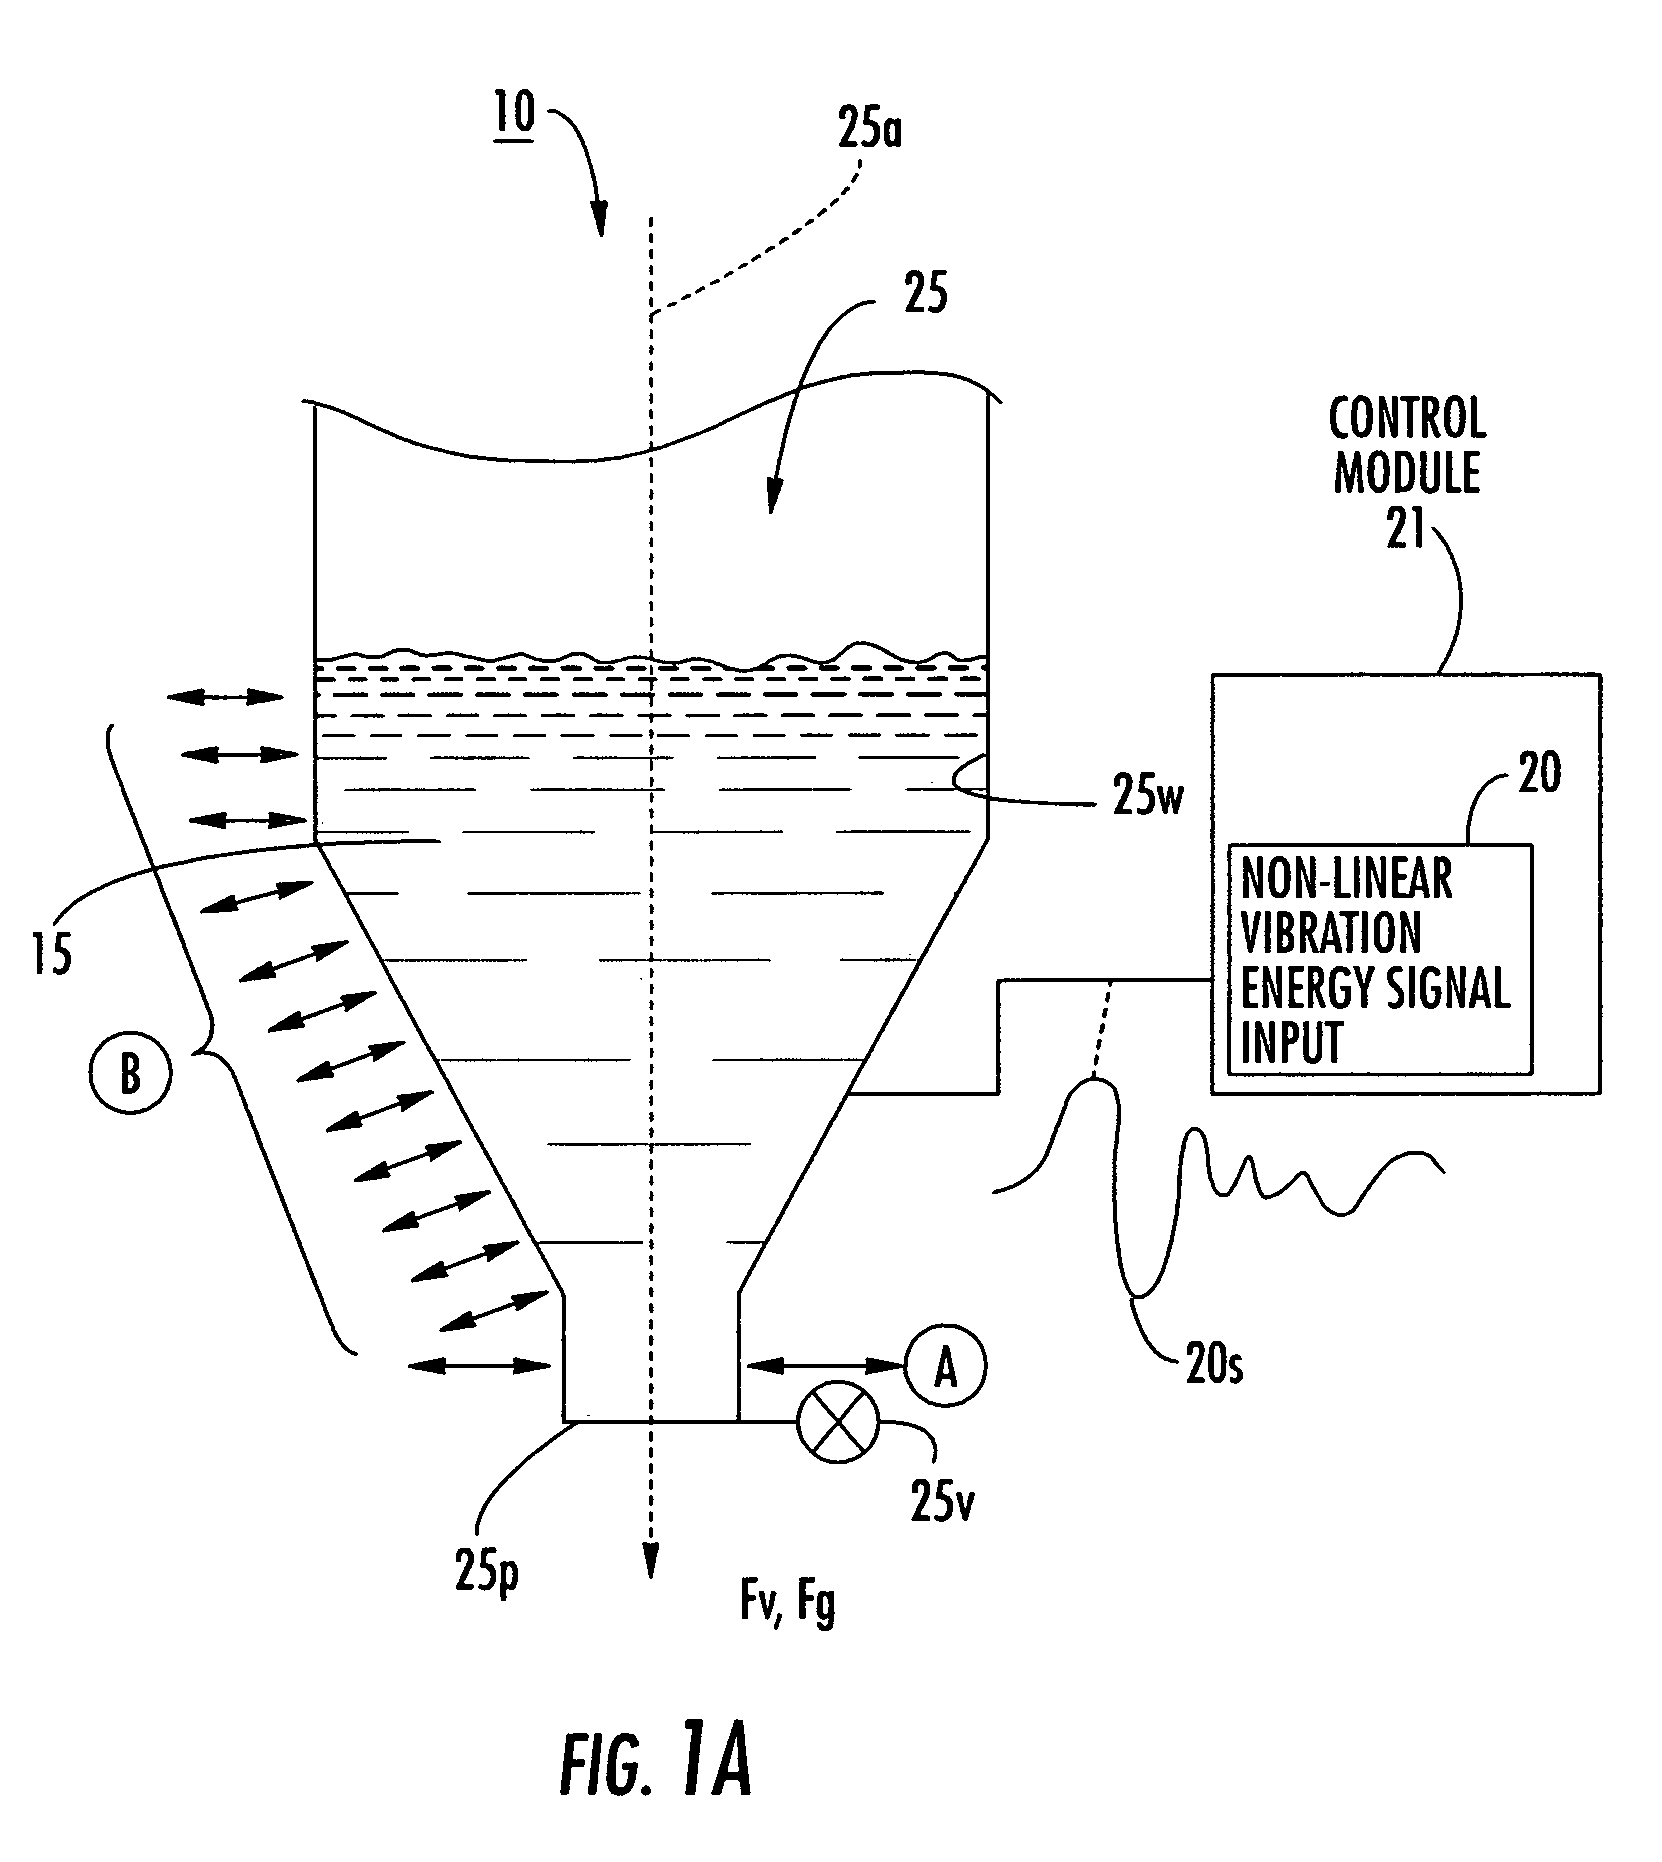 Apparatus, systems and related methods for processing, dispensing and/or evaluating dry powders